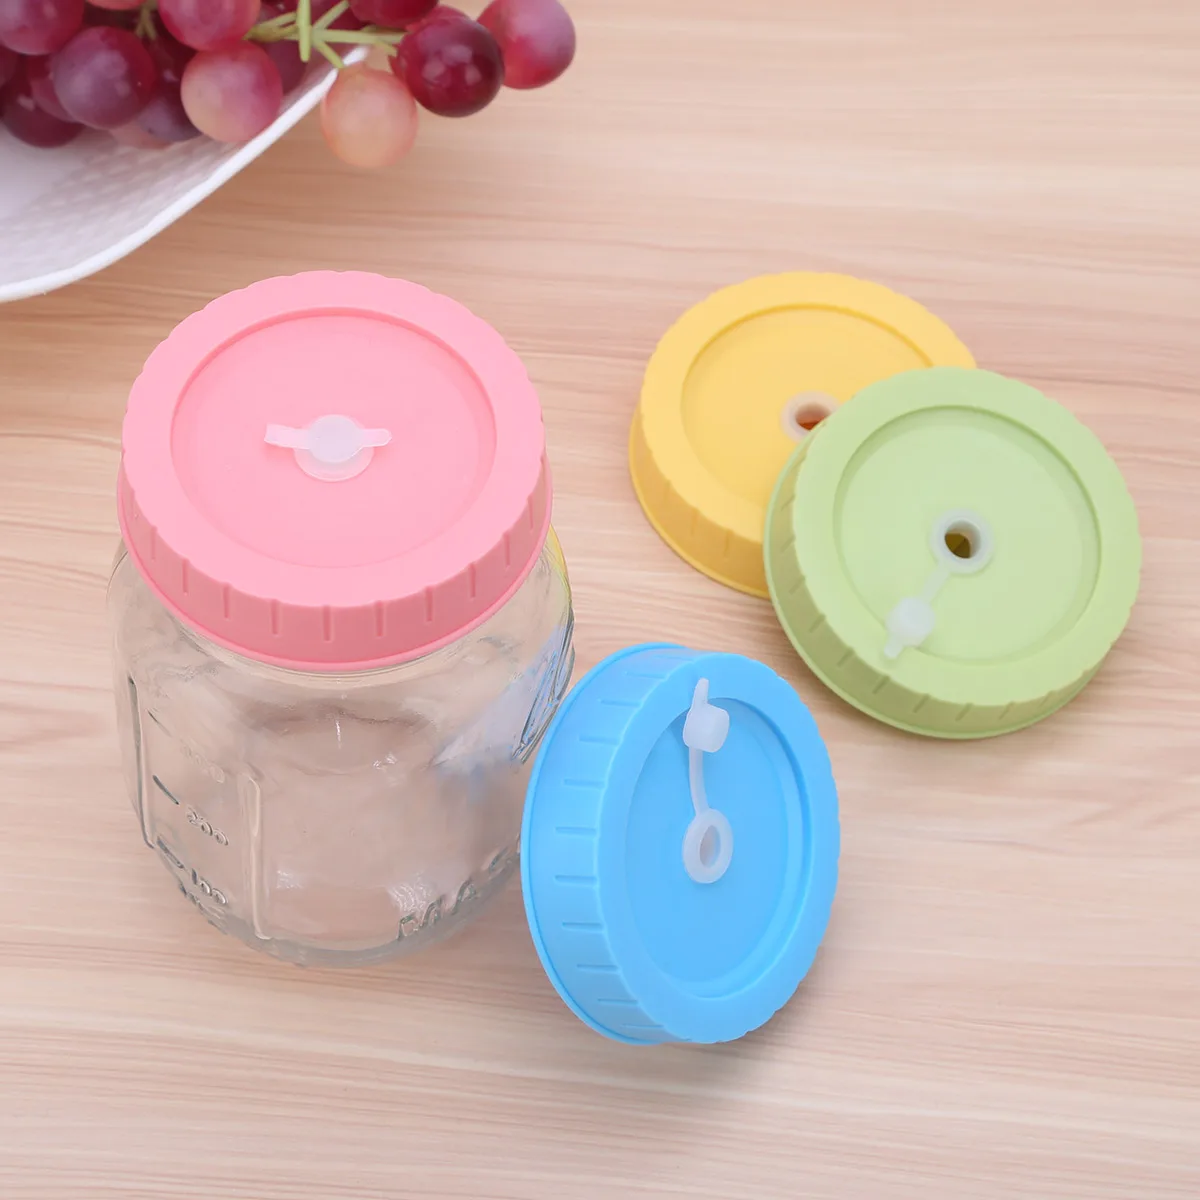 4Pcs 70mm Mason Jars Lids Plastic Decorative Bottle Covers Leakproof Water Cup Caps Drinking Jar Stopper Storage Cover with Hole images - 6